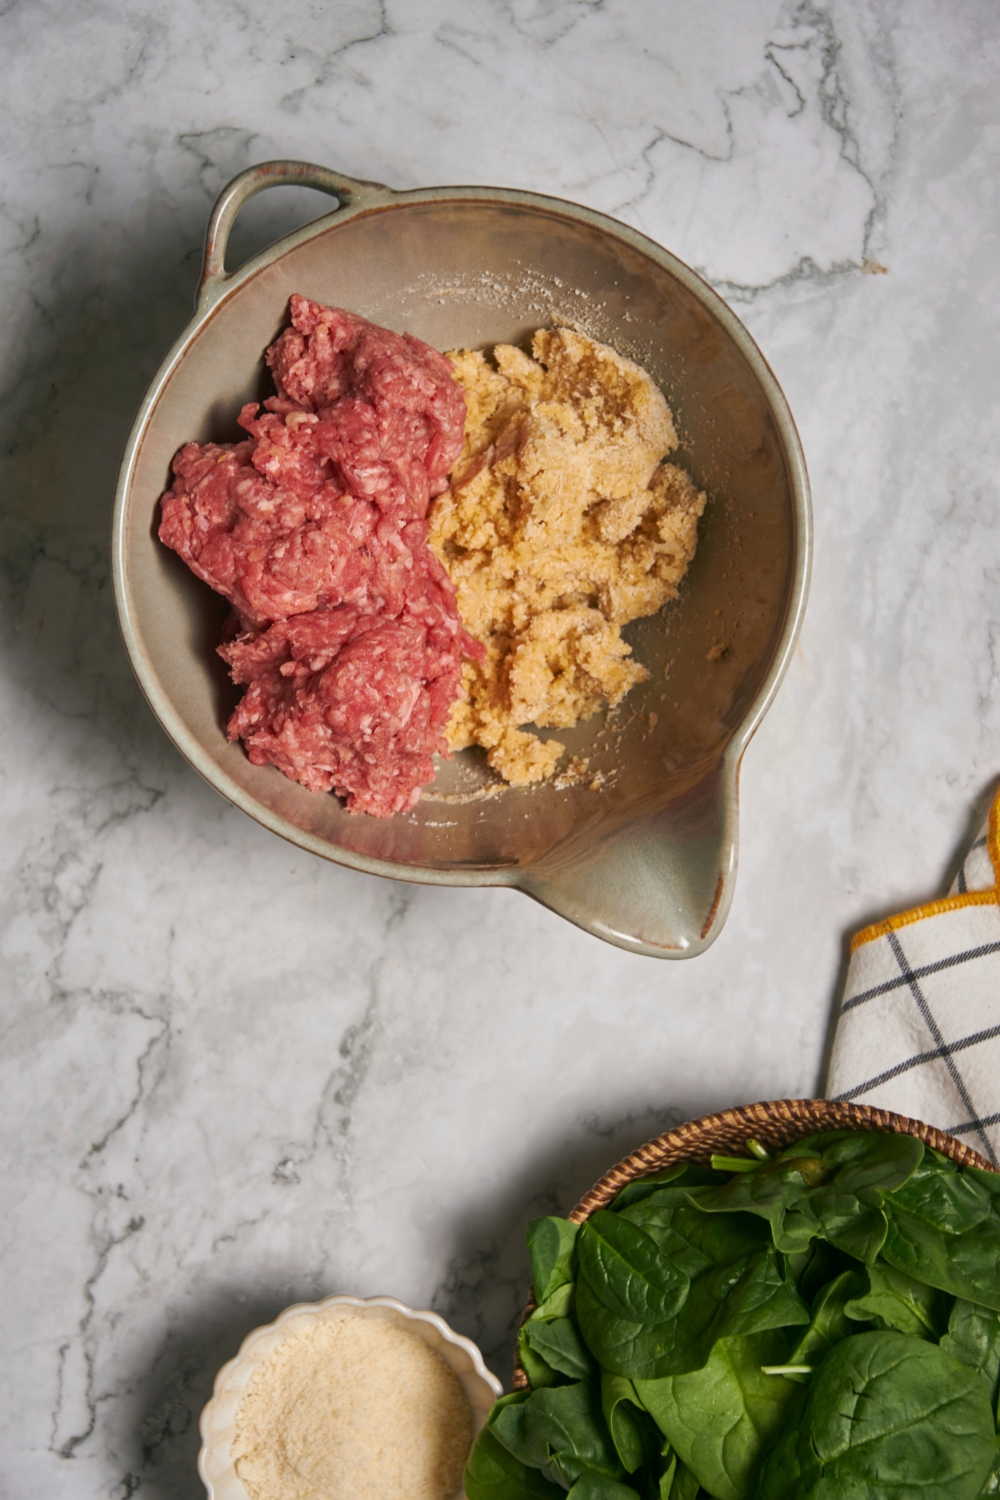 A mixing bowl filled half with raw meat and half with a bread crumb mixture, with a bowl of raw spinach and a small bowl of breadcrumbs next to the mixing bowl.